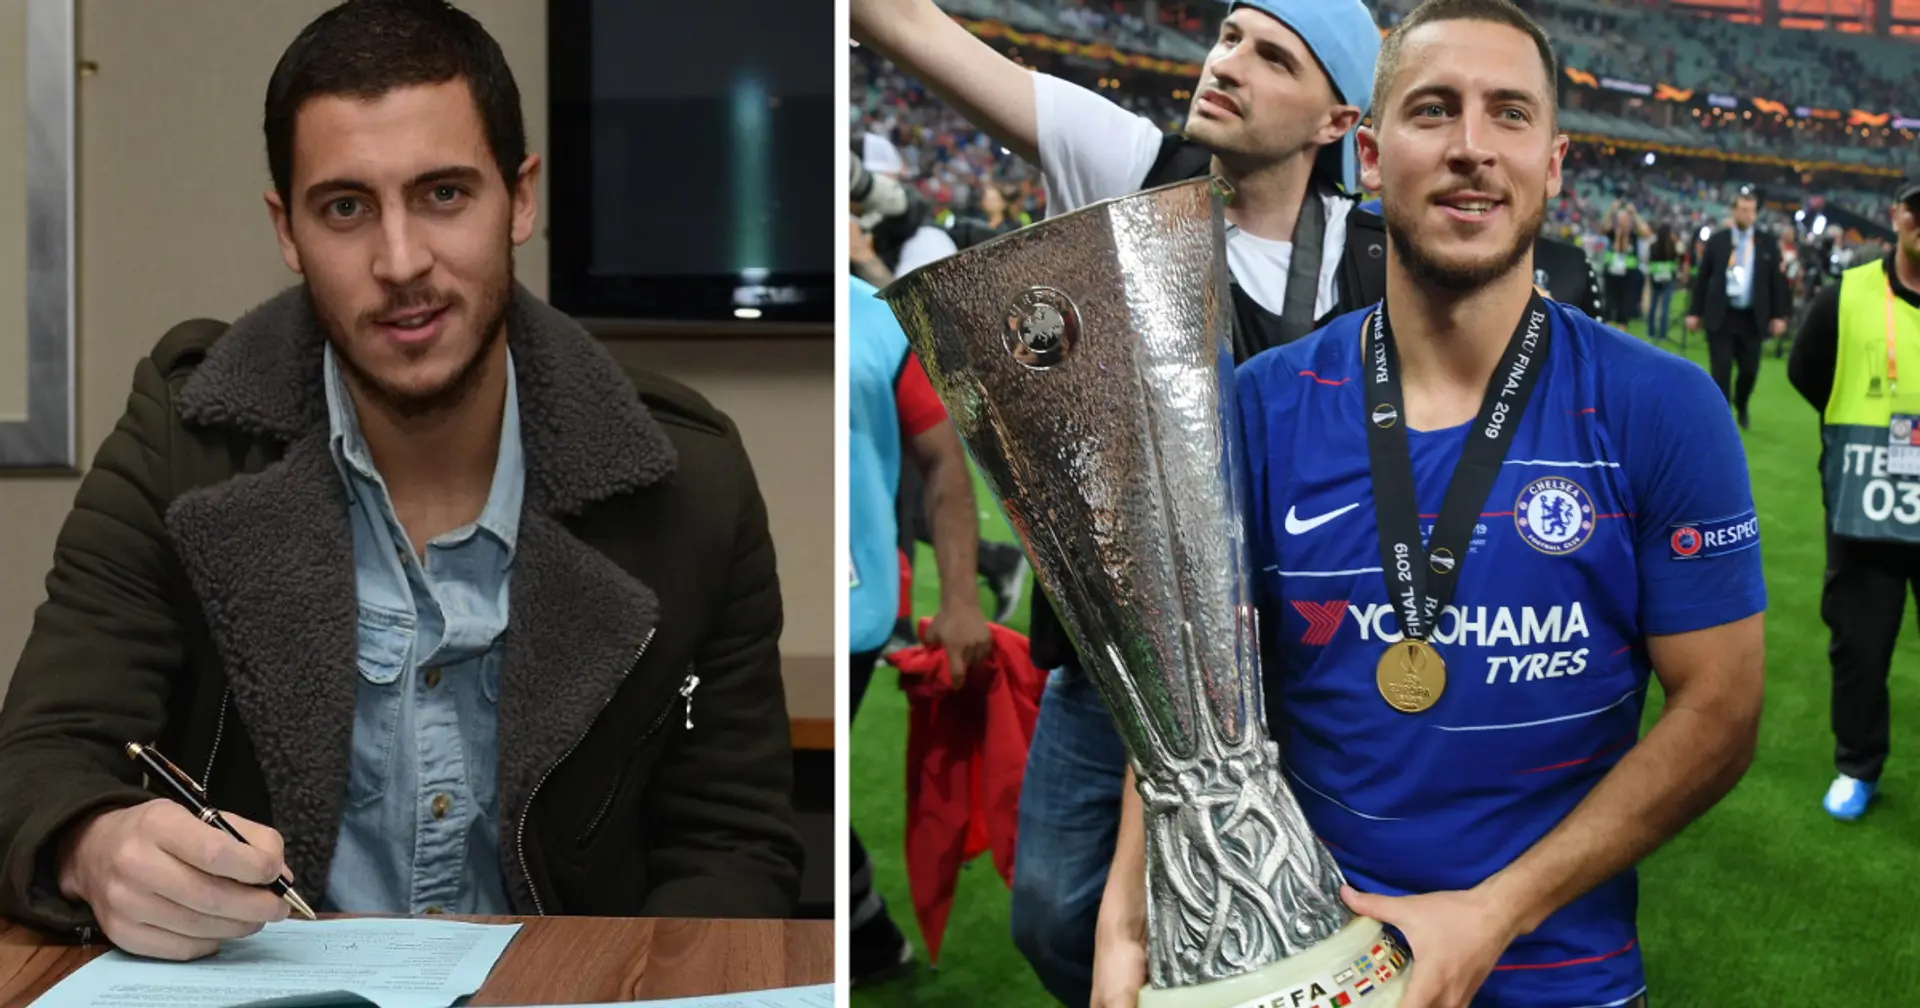 100+ goals, 92 assists, 6 trophies: Hazard still Chelsea's best signing in 10 years